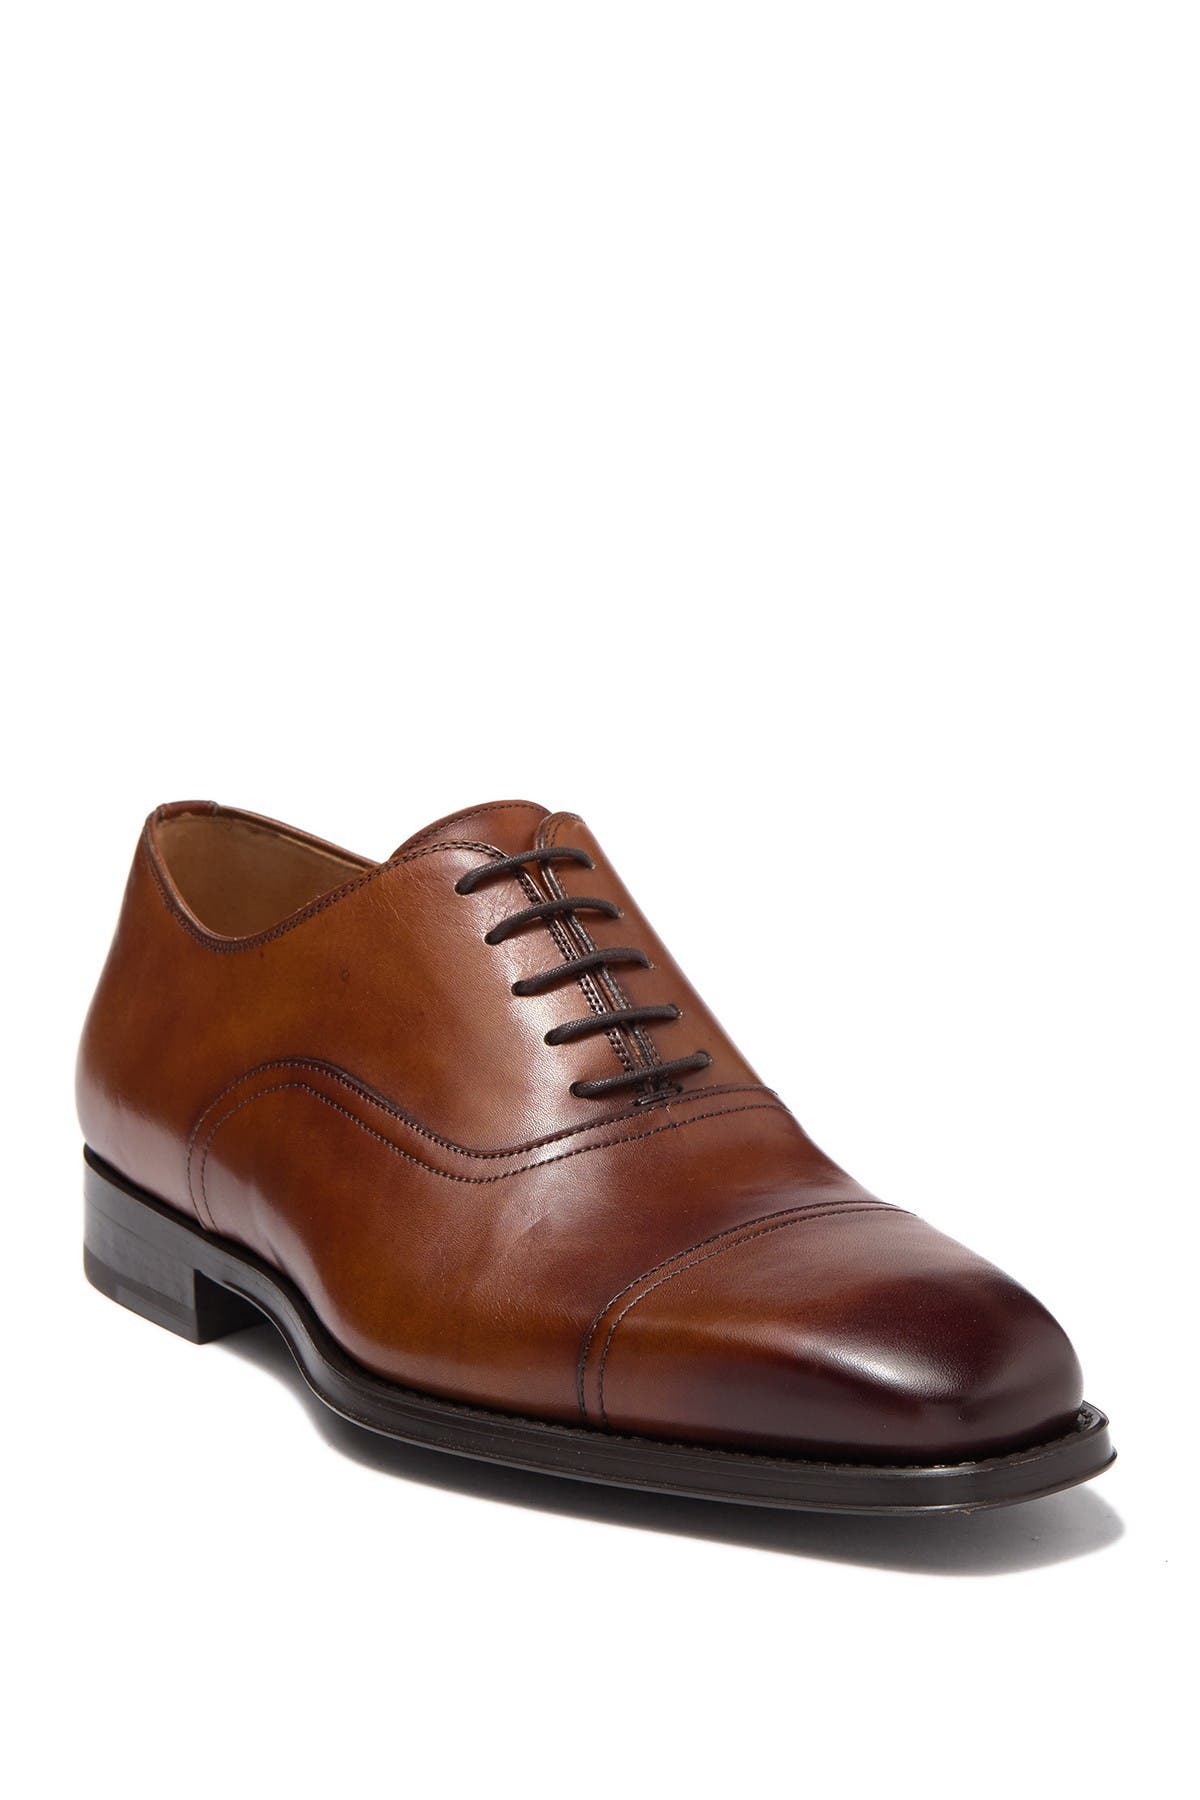 magnanni lucas leather oxford